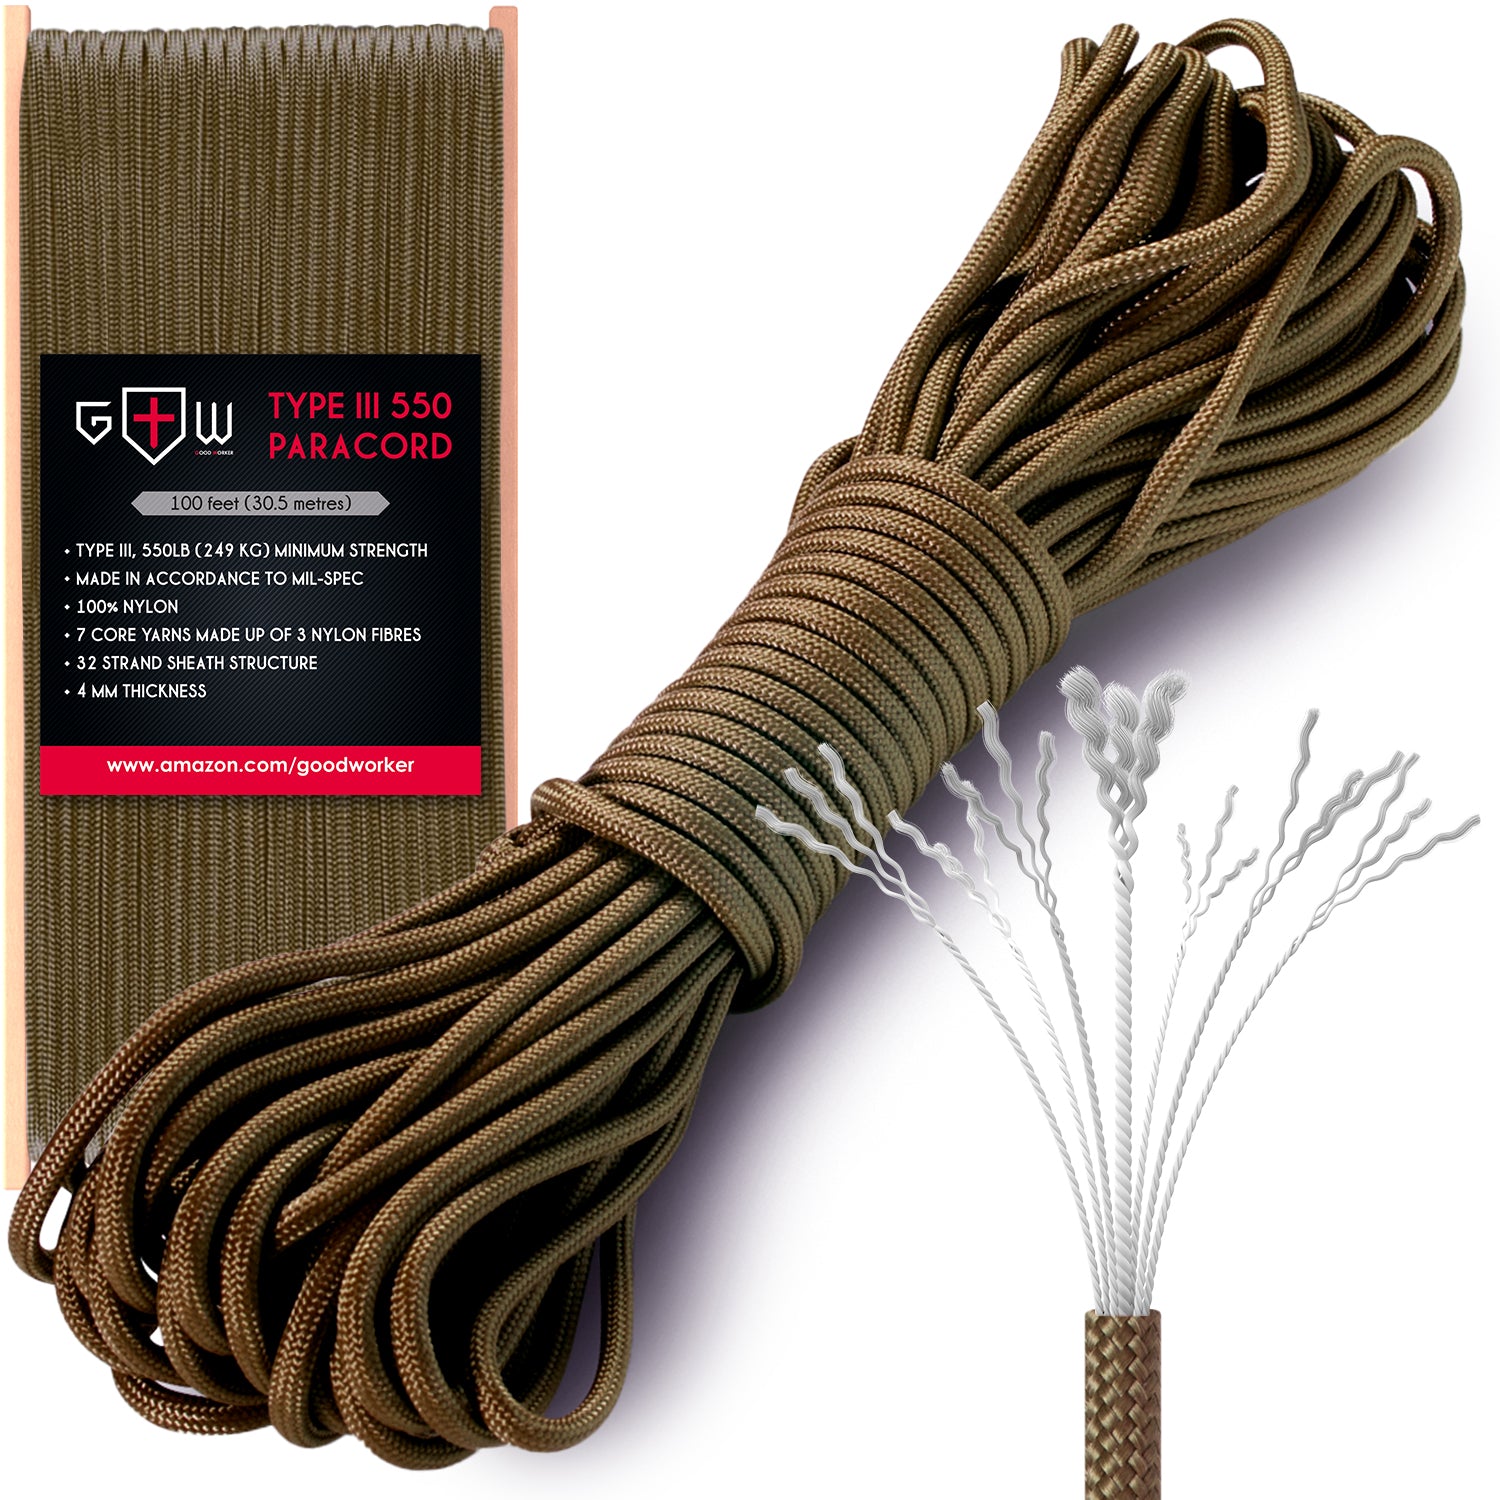 Grand Way 550 Mil-Spec Paracord Type III (100ft; Army Green)